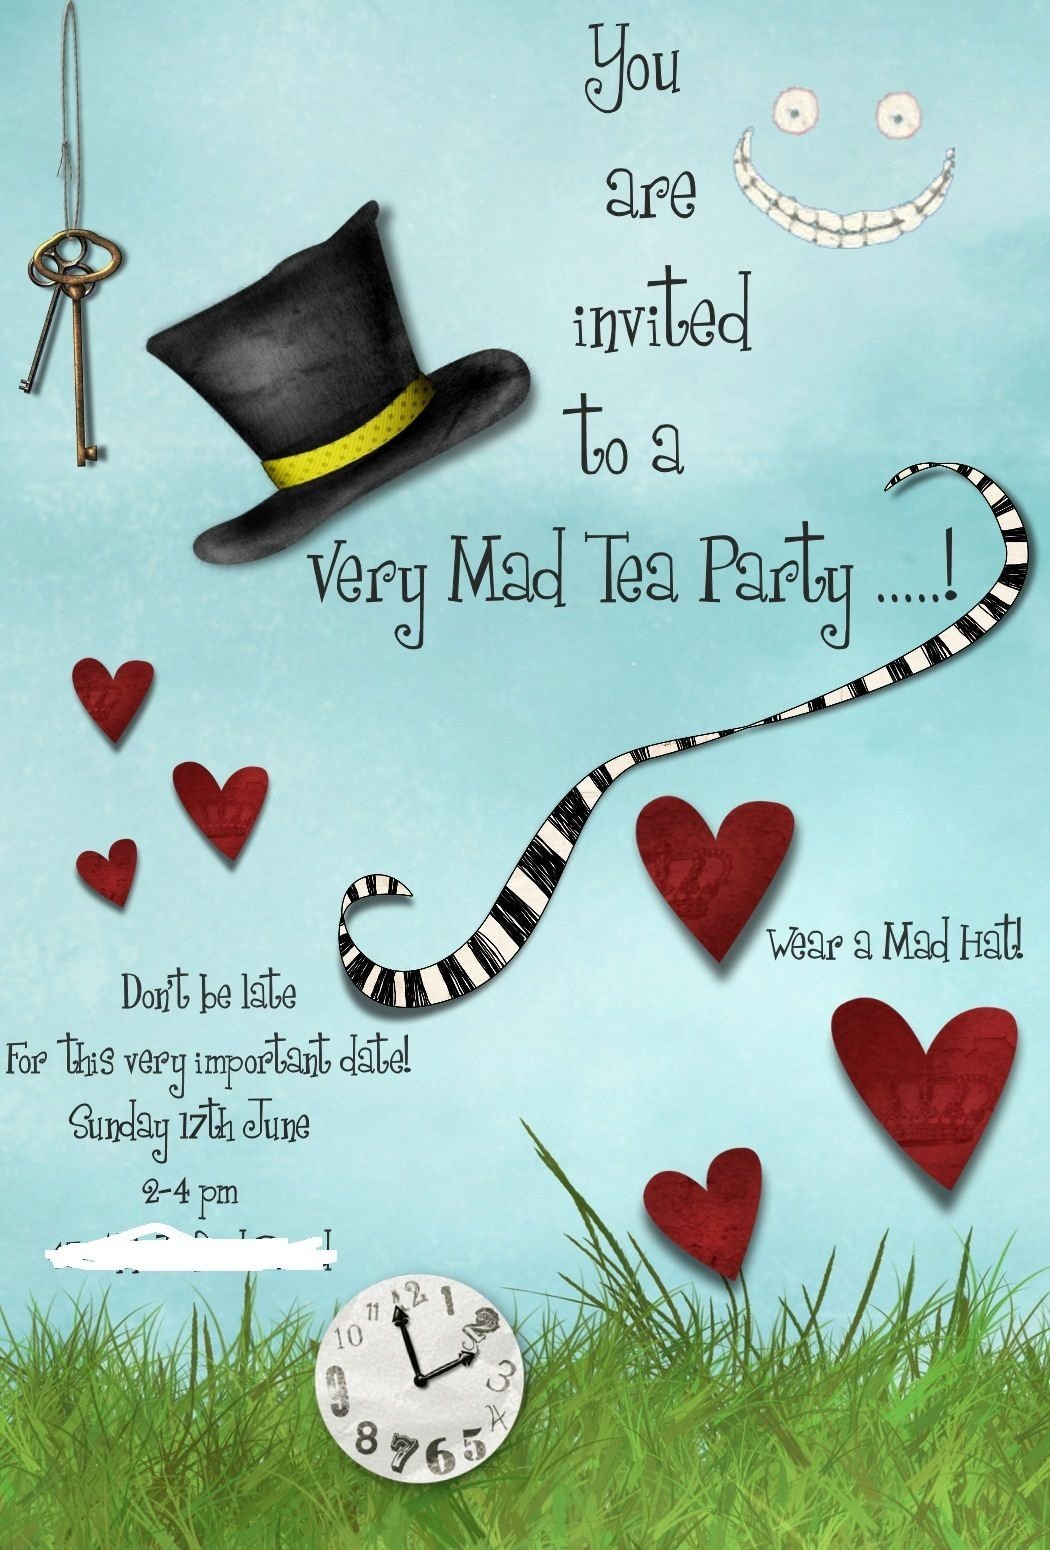 10 Most Popular Mad Hatters Tea Party Ideas mad hatter tea party ideas jens place mad hatters tea party 2022